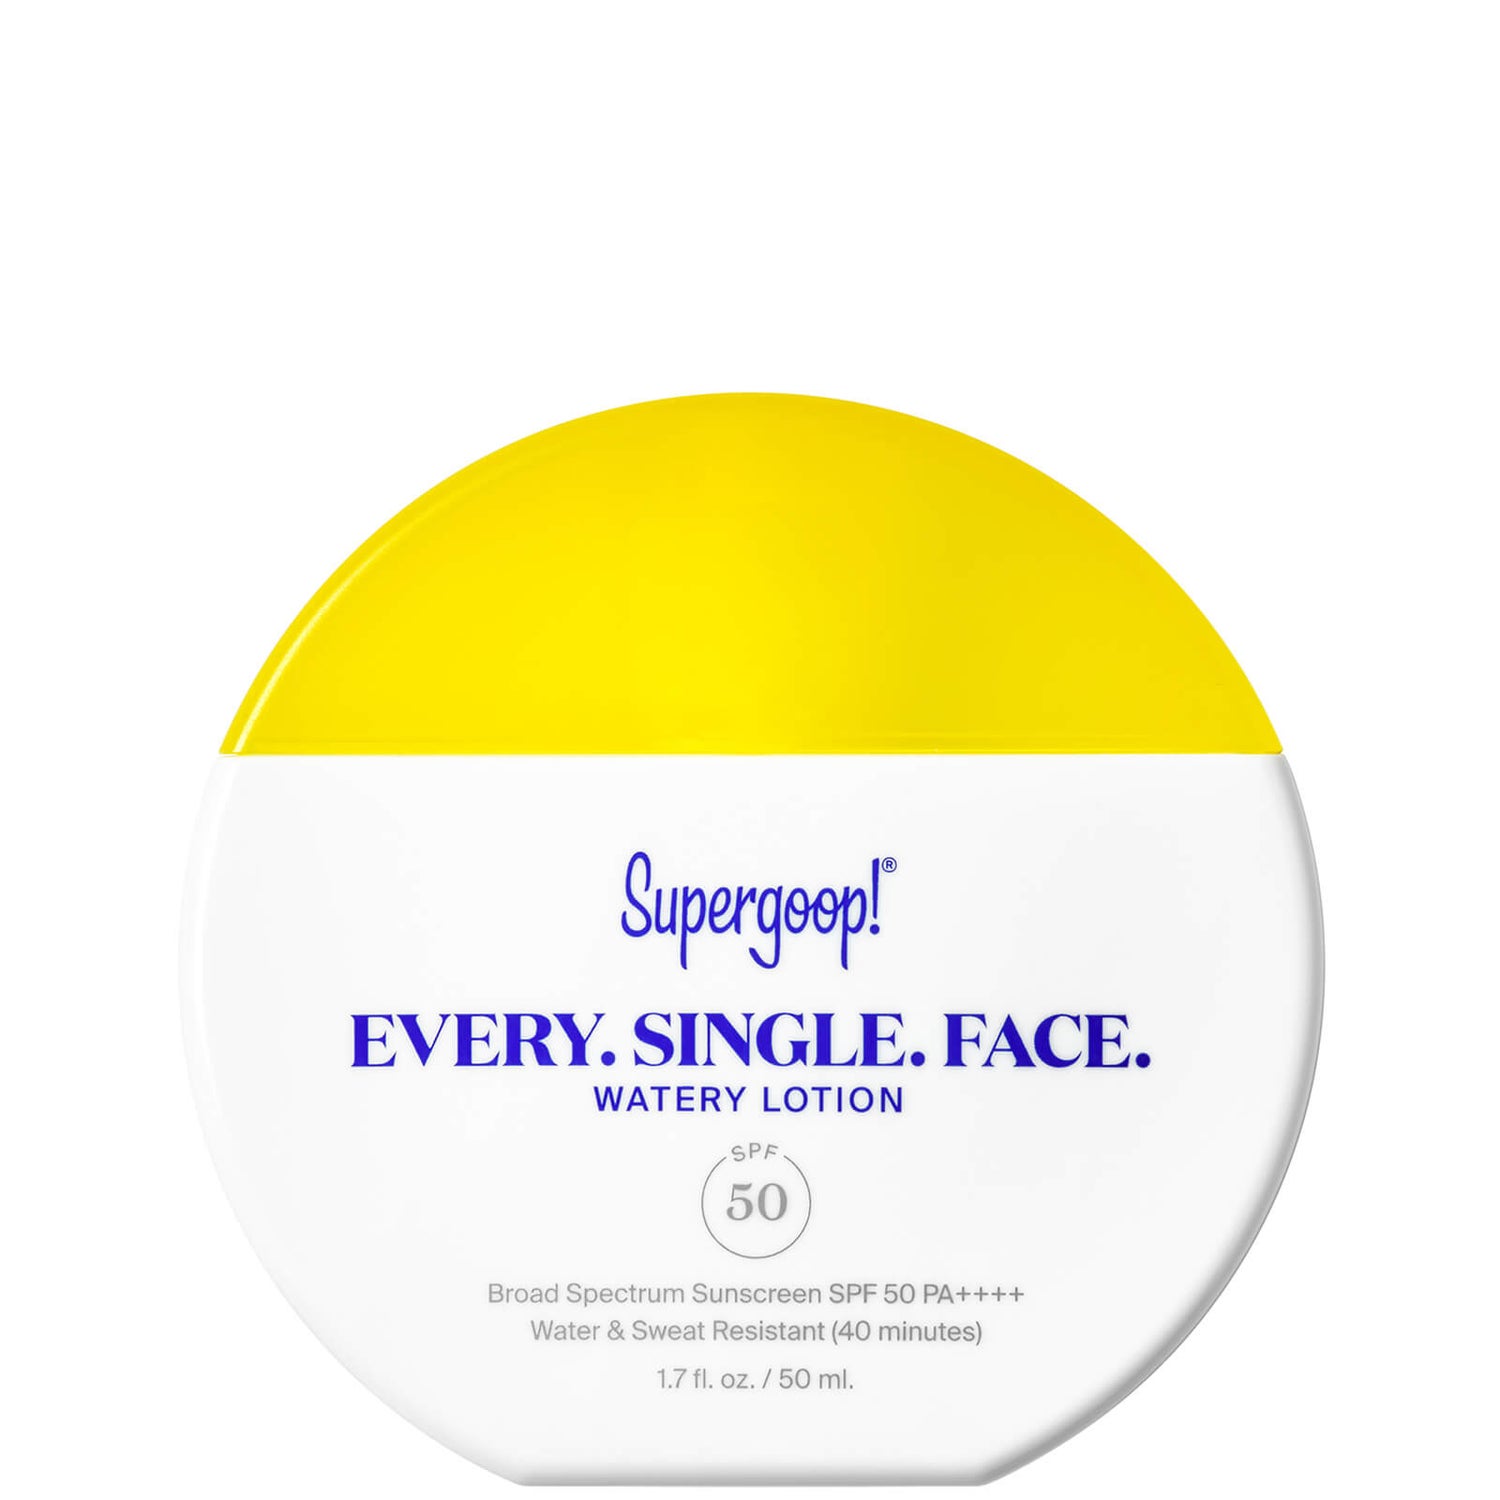 Supergoop! Every. Single. Face. Watery Lotion SPF50 30ml